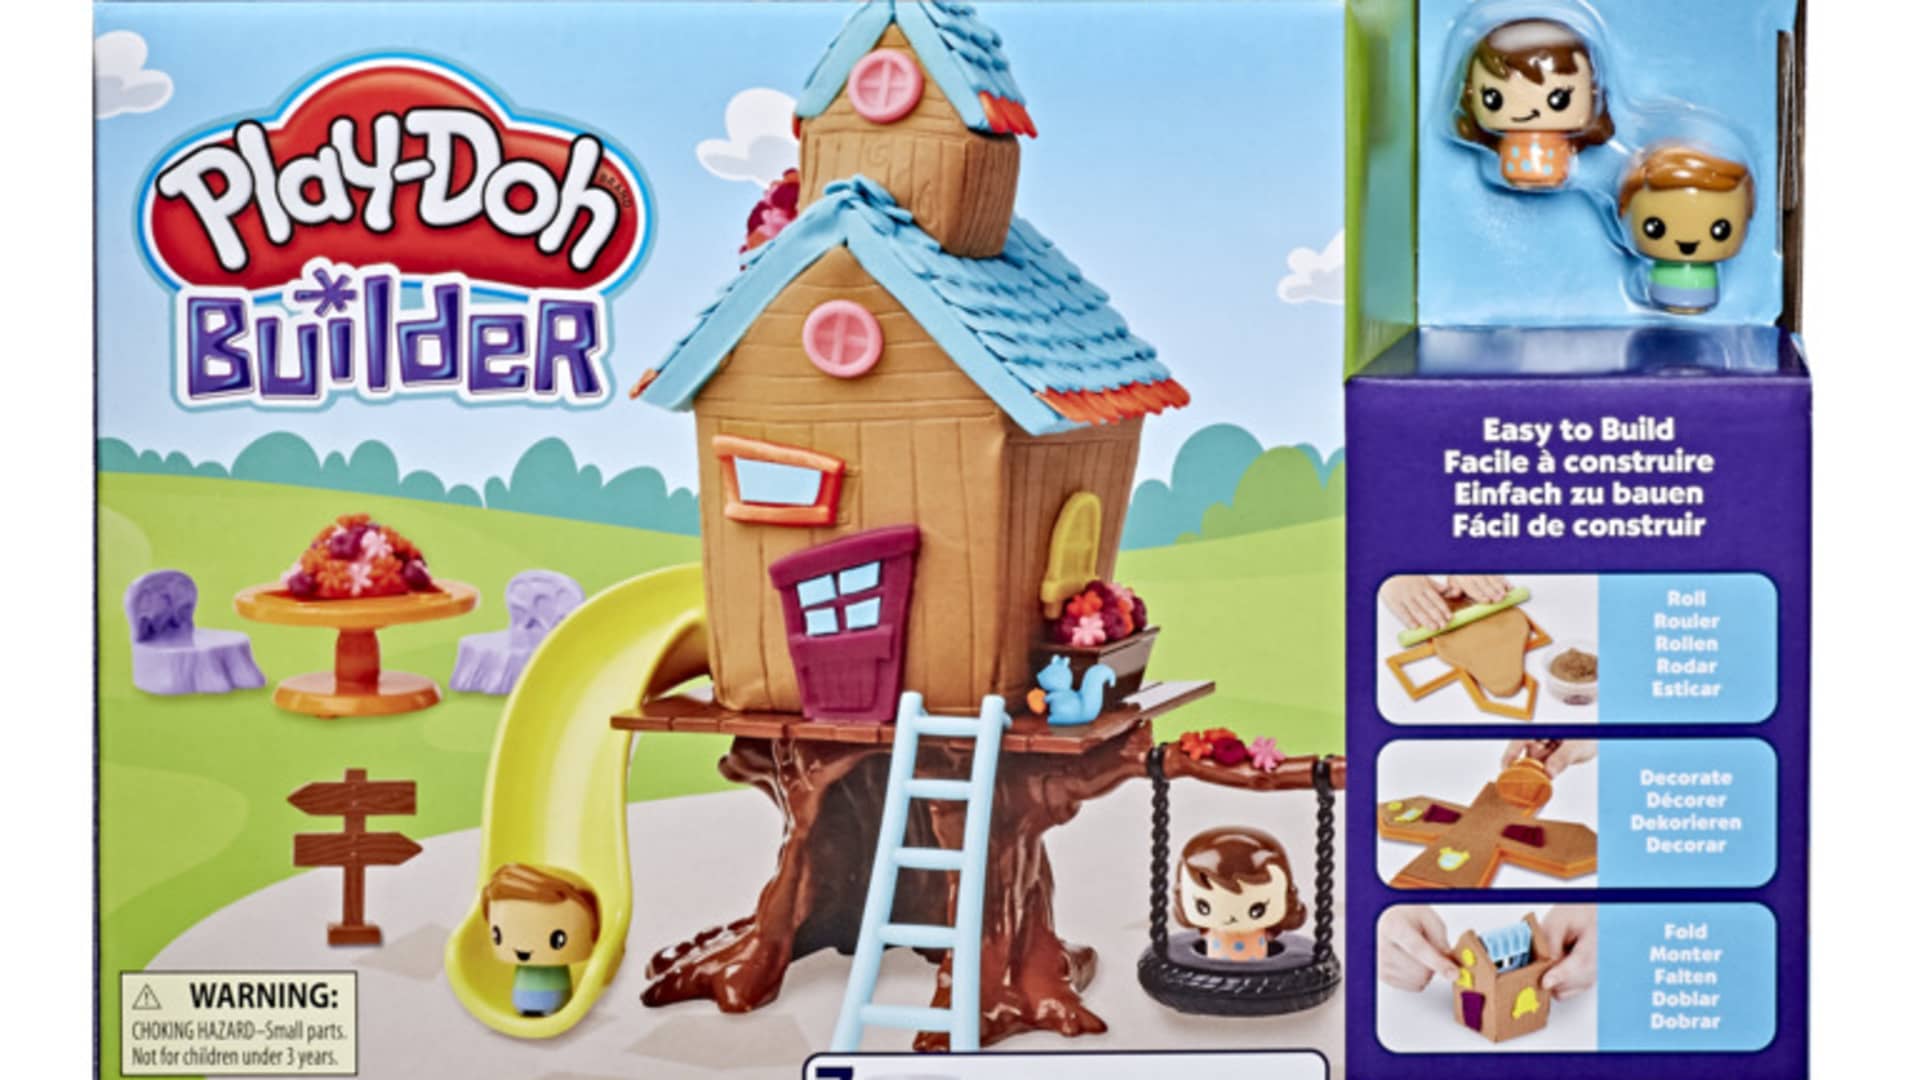 Play-Doh Builder Treehouse from Hasbro